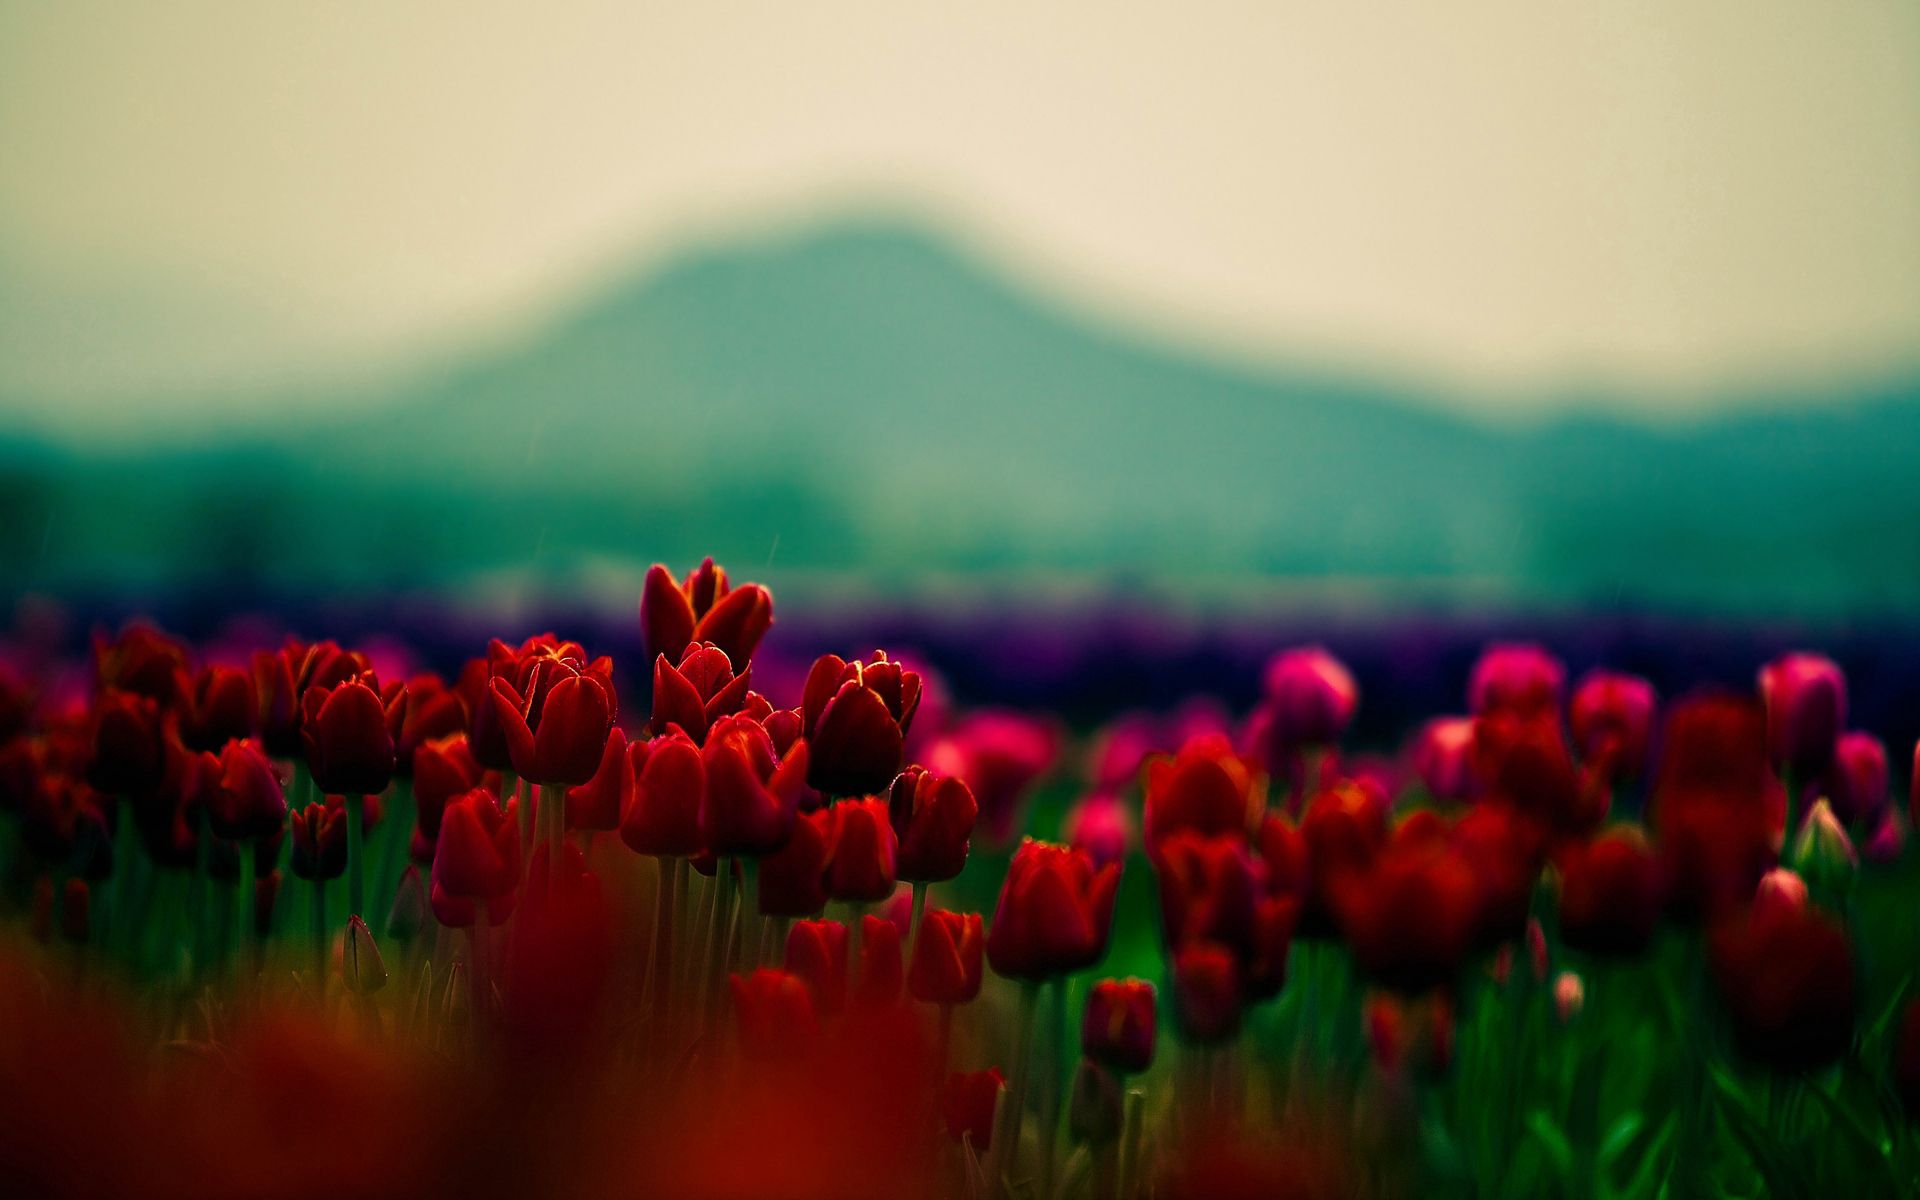 mountains, flowers, tulips, blur, smooth, field